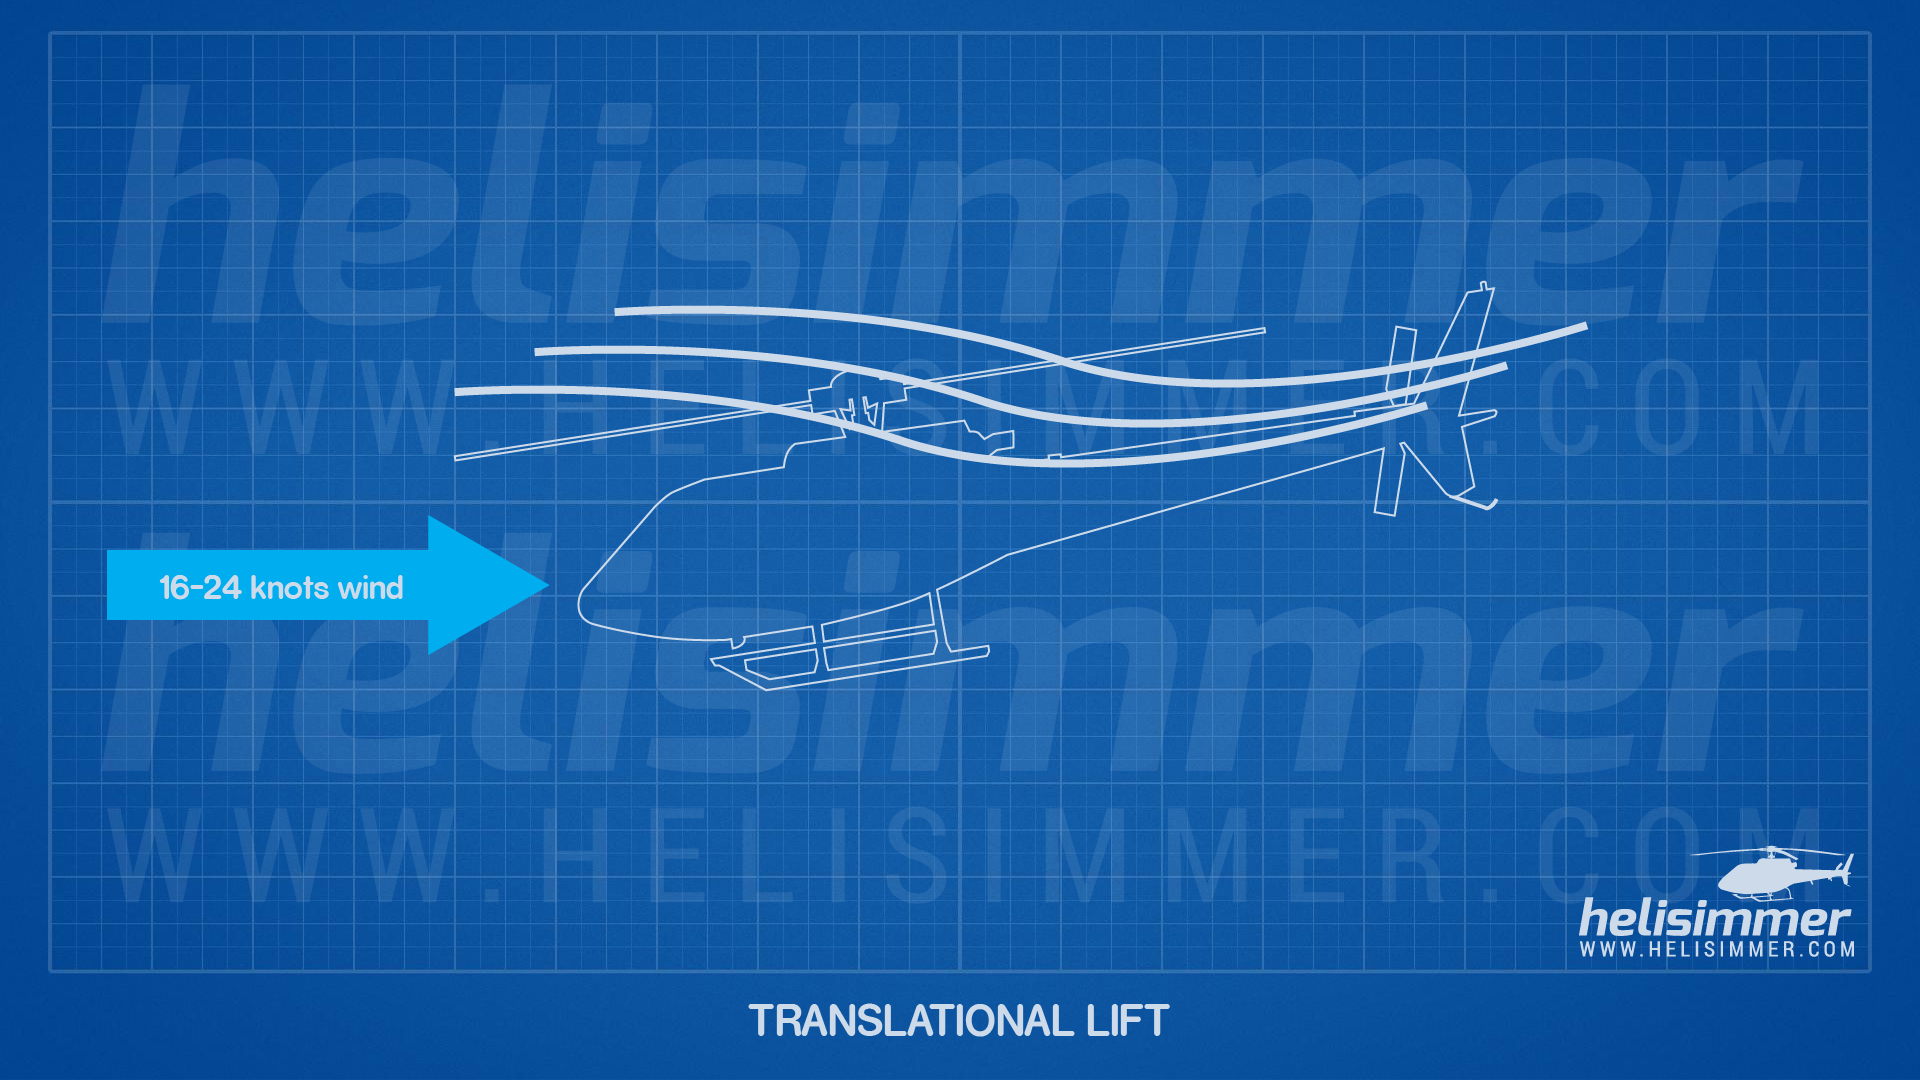 How to fly helicopters - translational lift